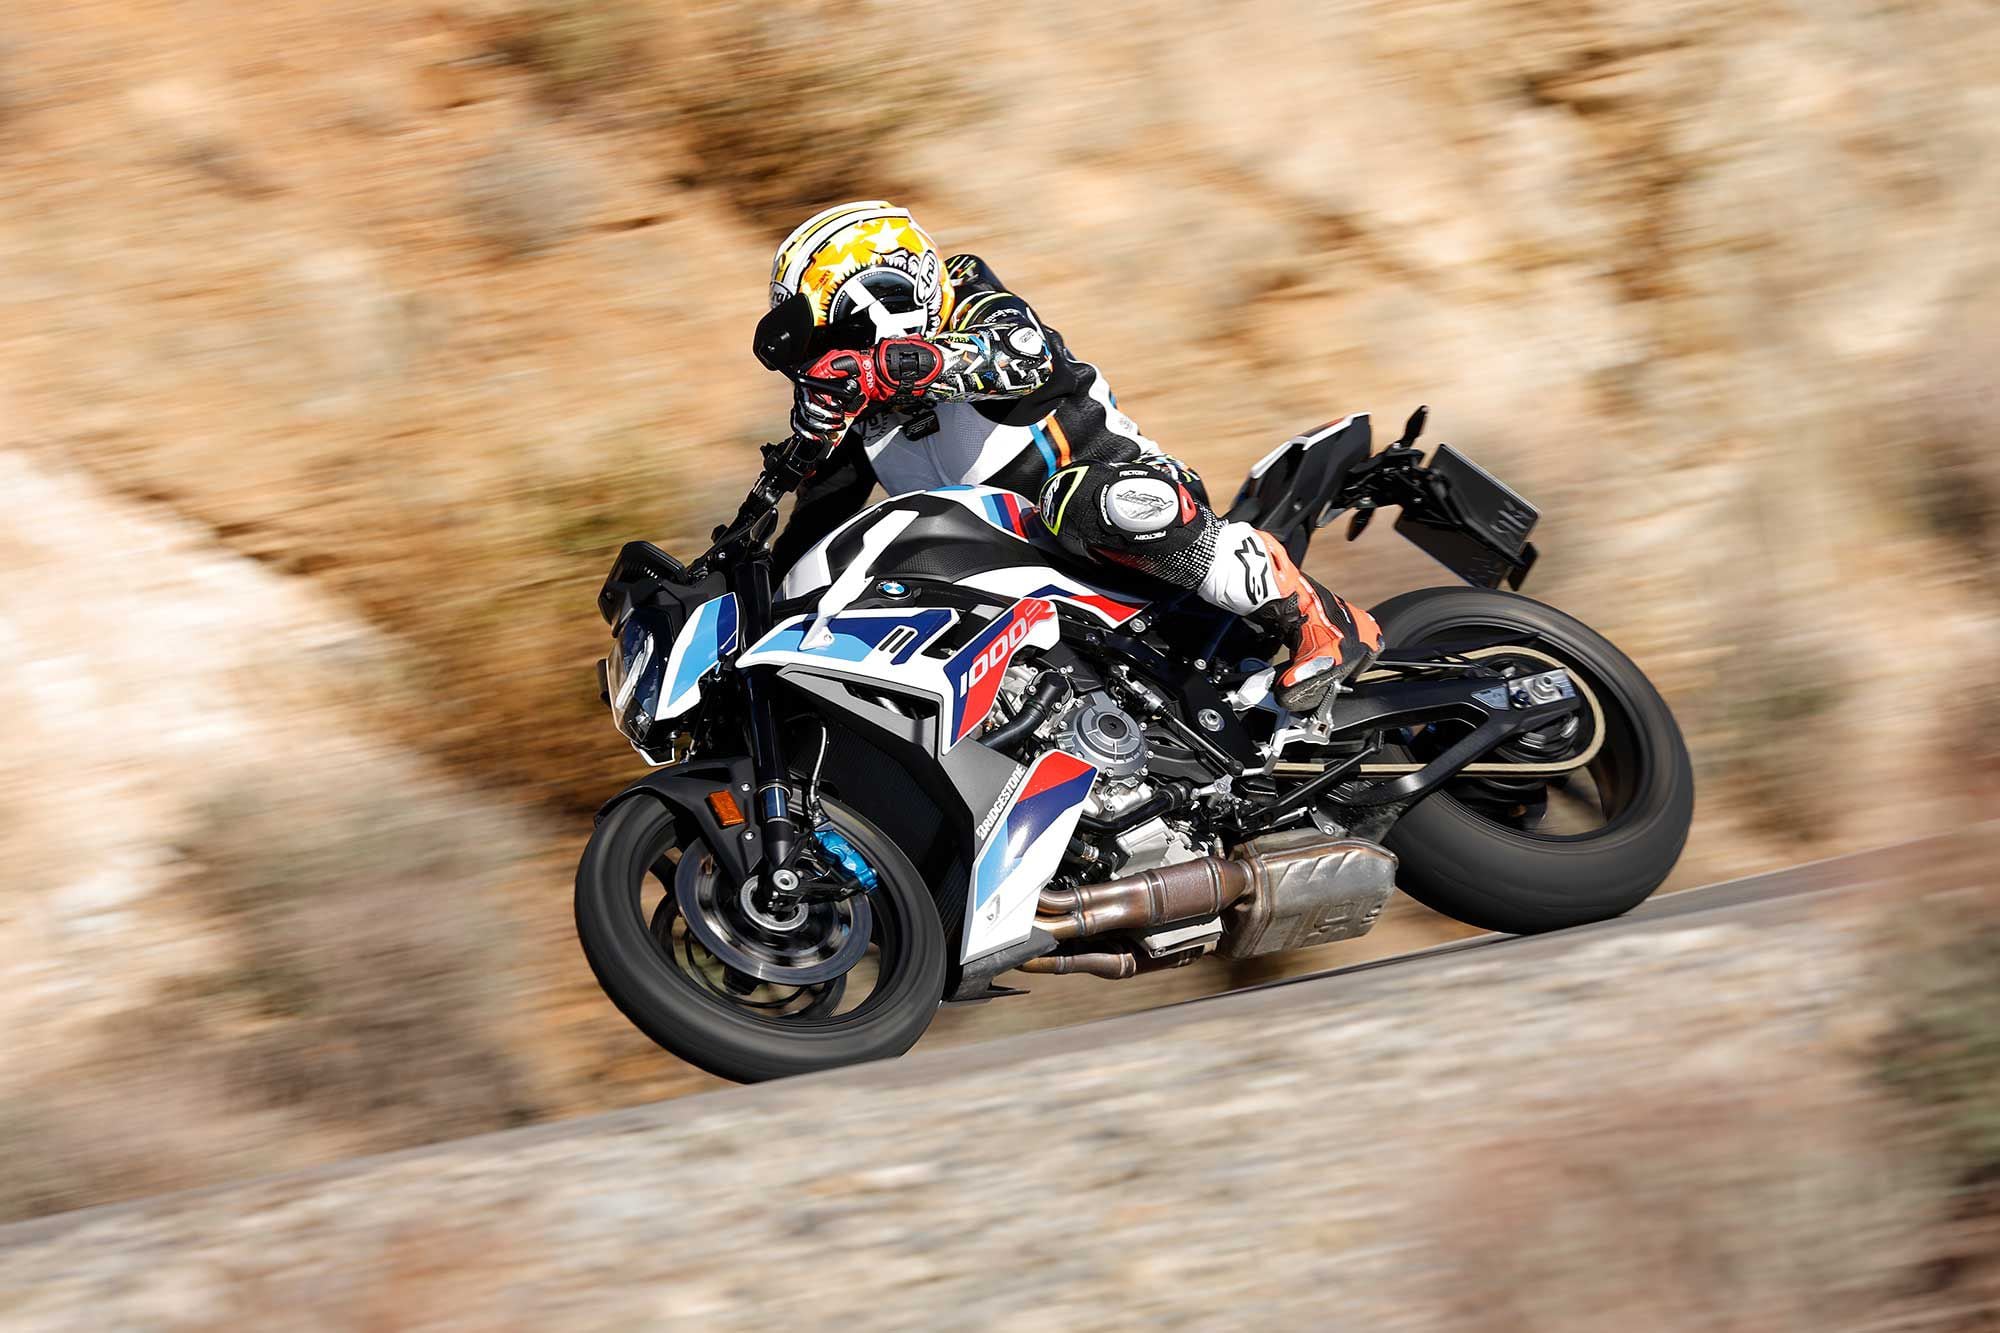 We headed out to southern Spain to see if the BMW M 1000 R lives up to the hype.